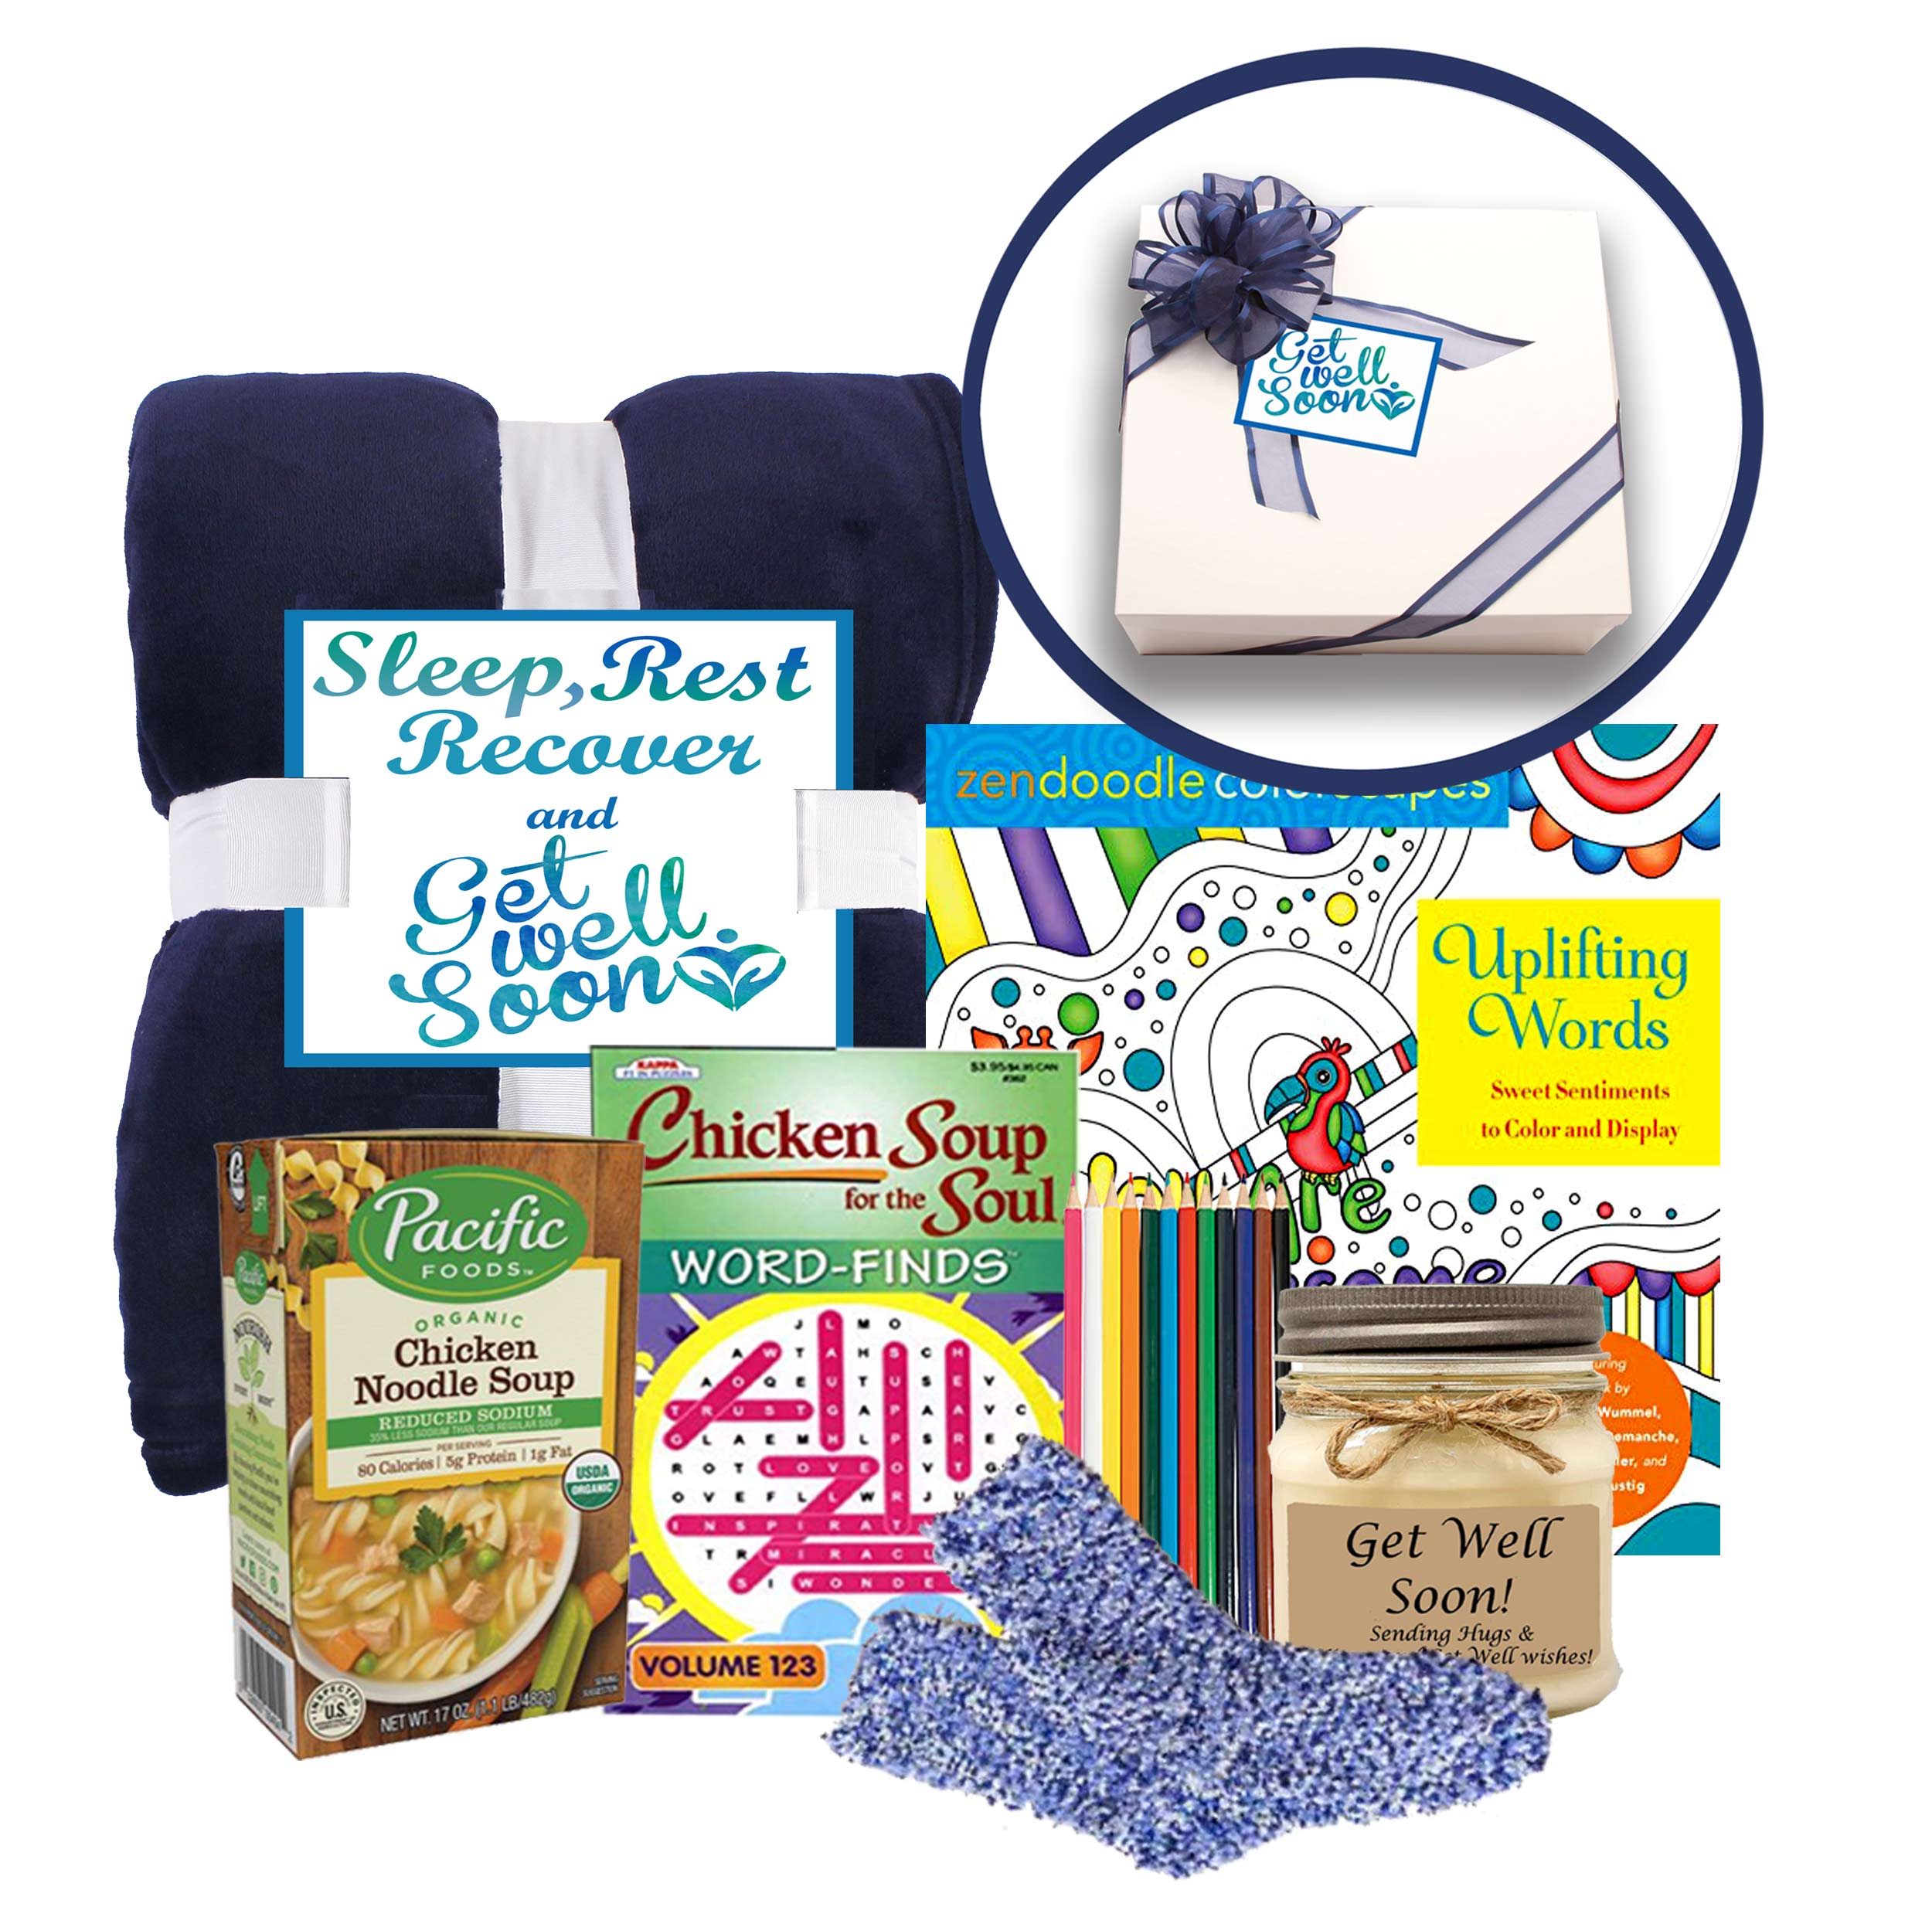 Sleep, Rest And Recover Get Well Gift Basket For Women